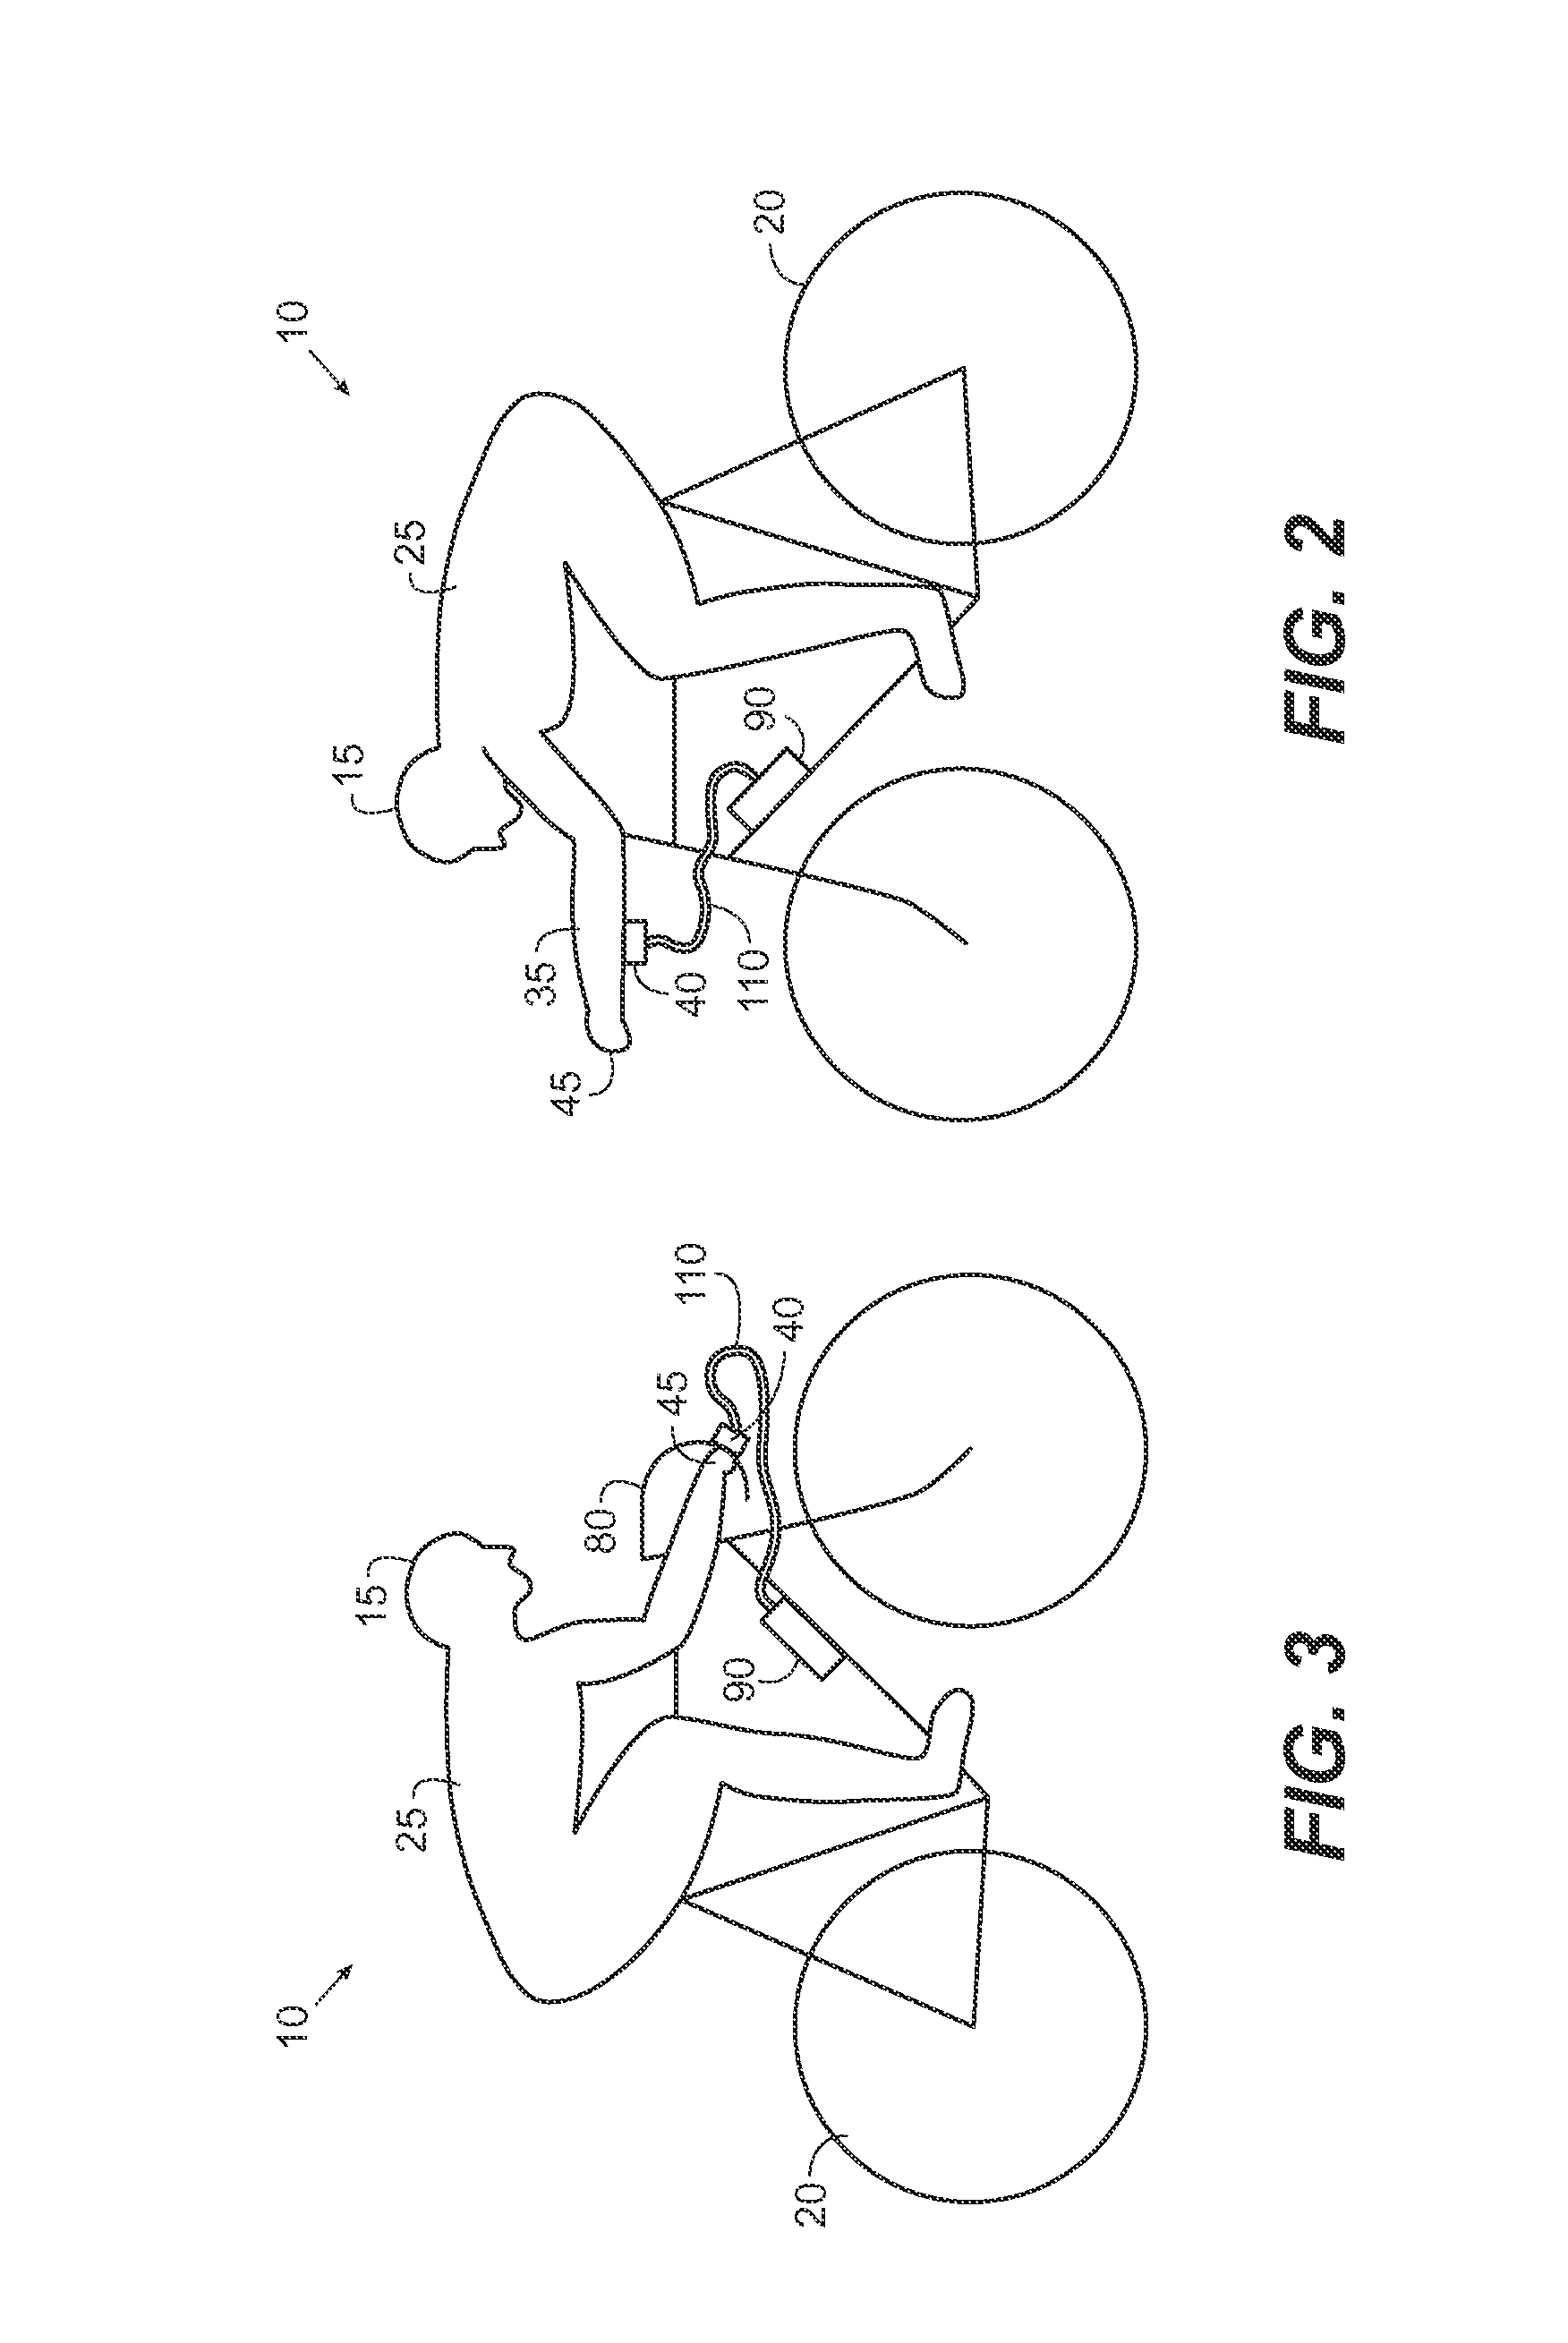 Sensor and feedback assembly for a bicycle